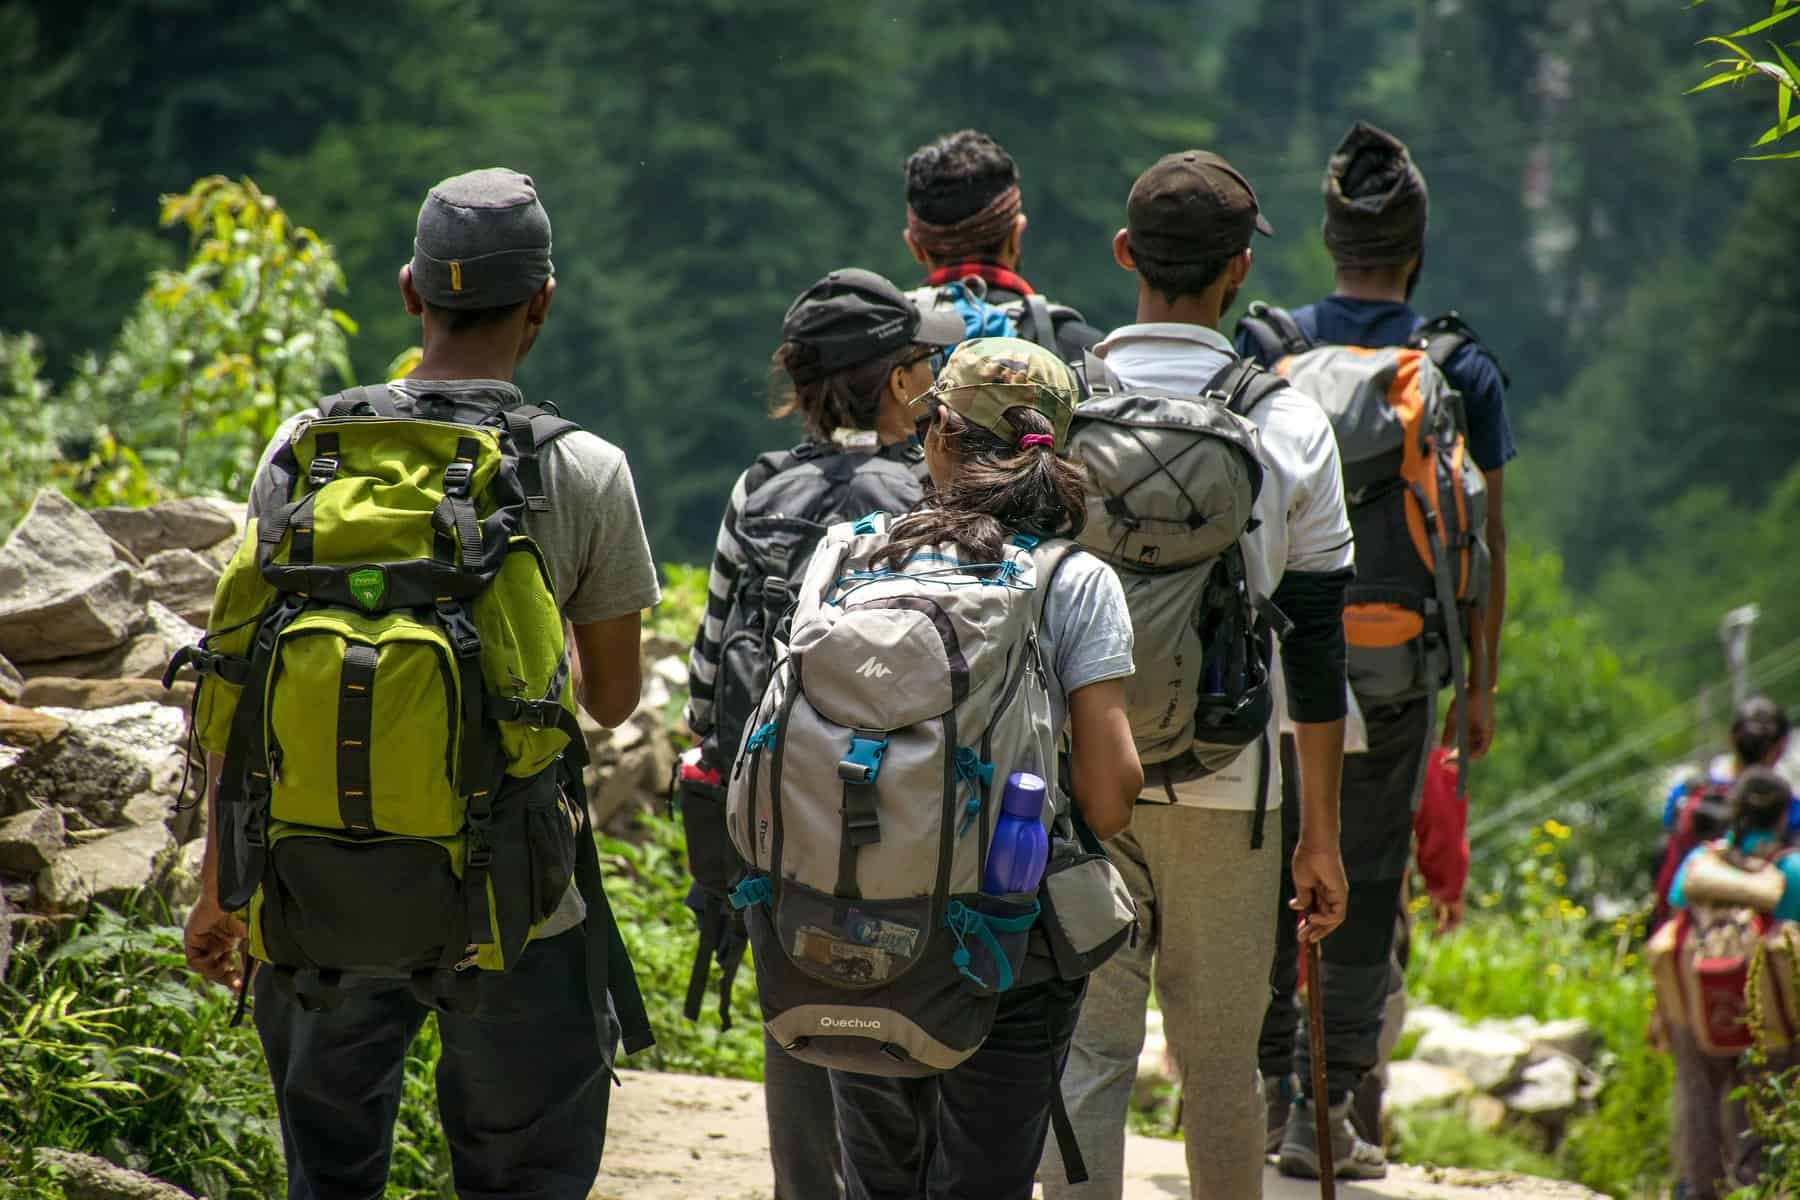 backpacking tips